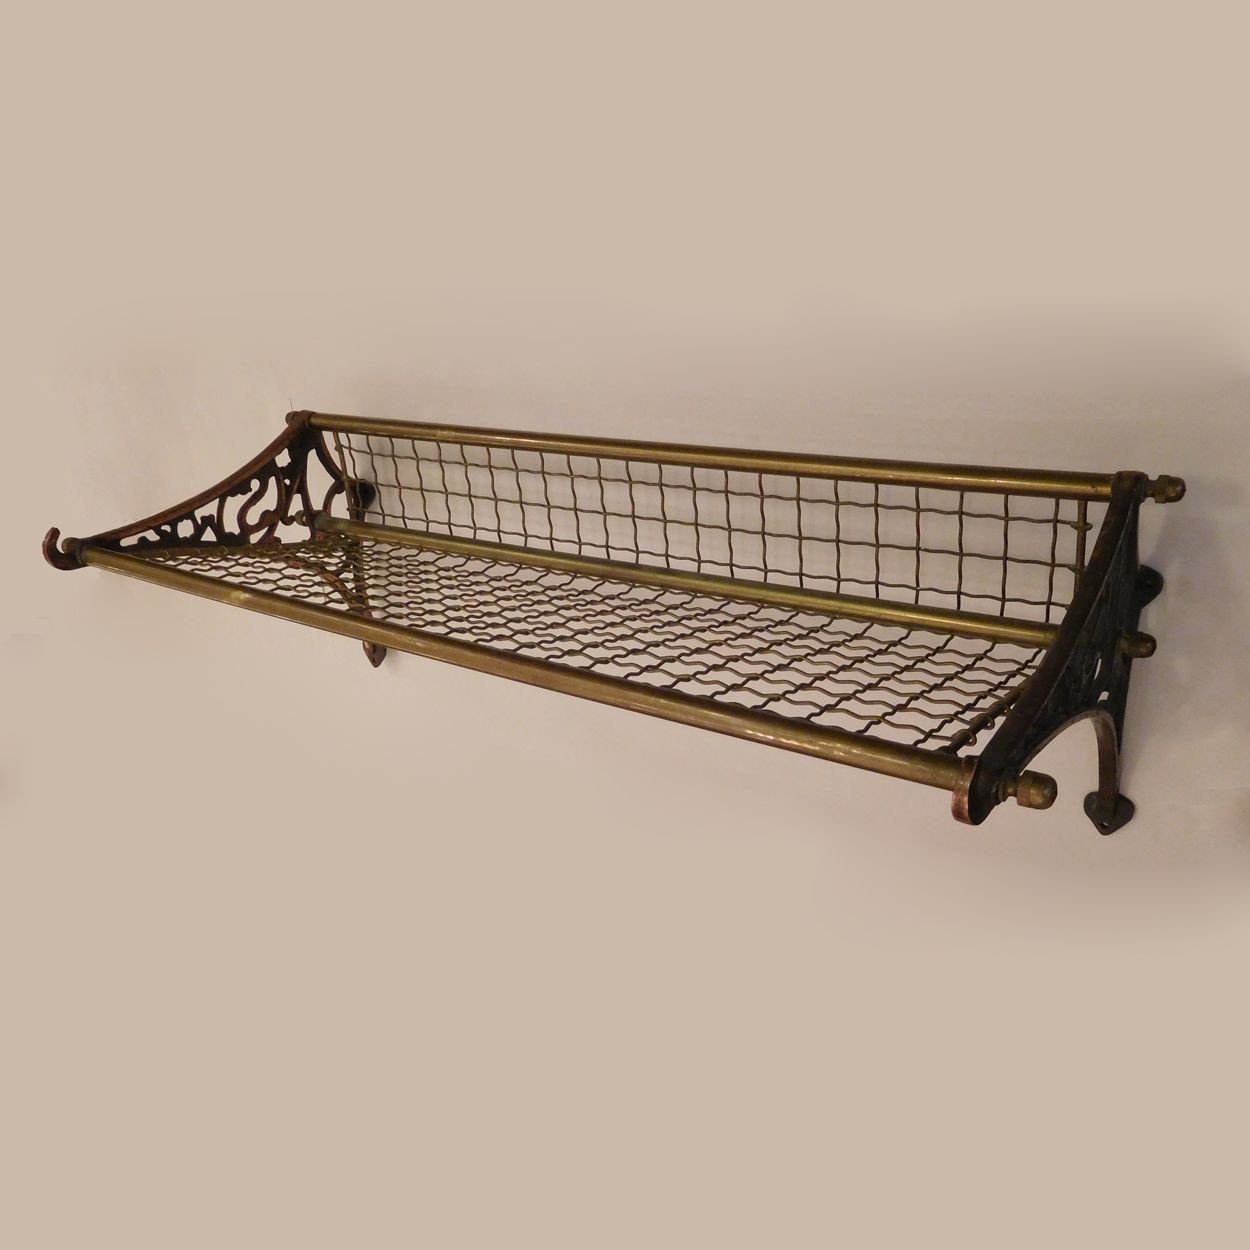 Luggage Rack for Bedroom Luxury Decorative Items Category the Brass Knob